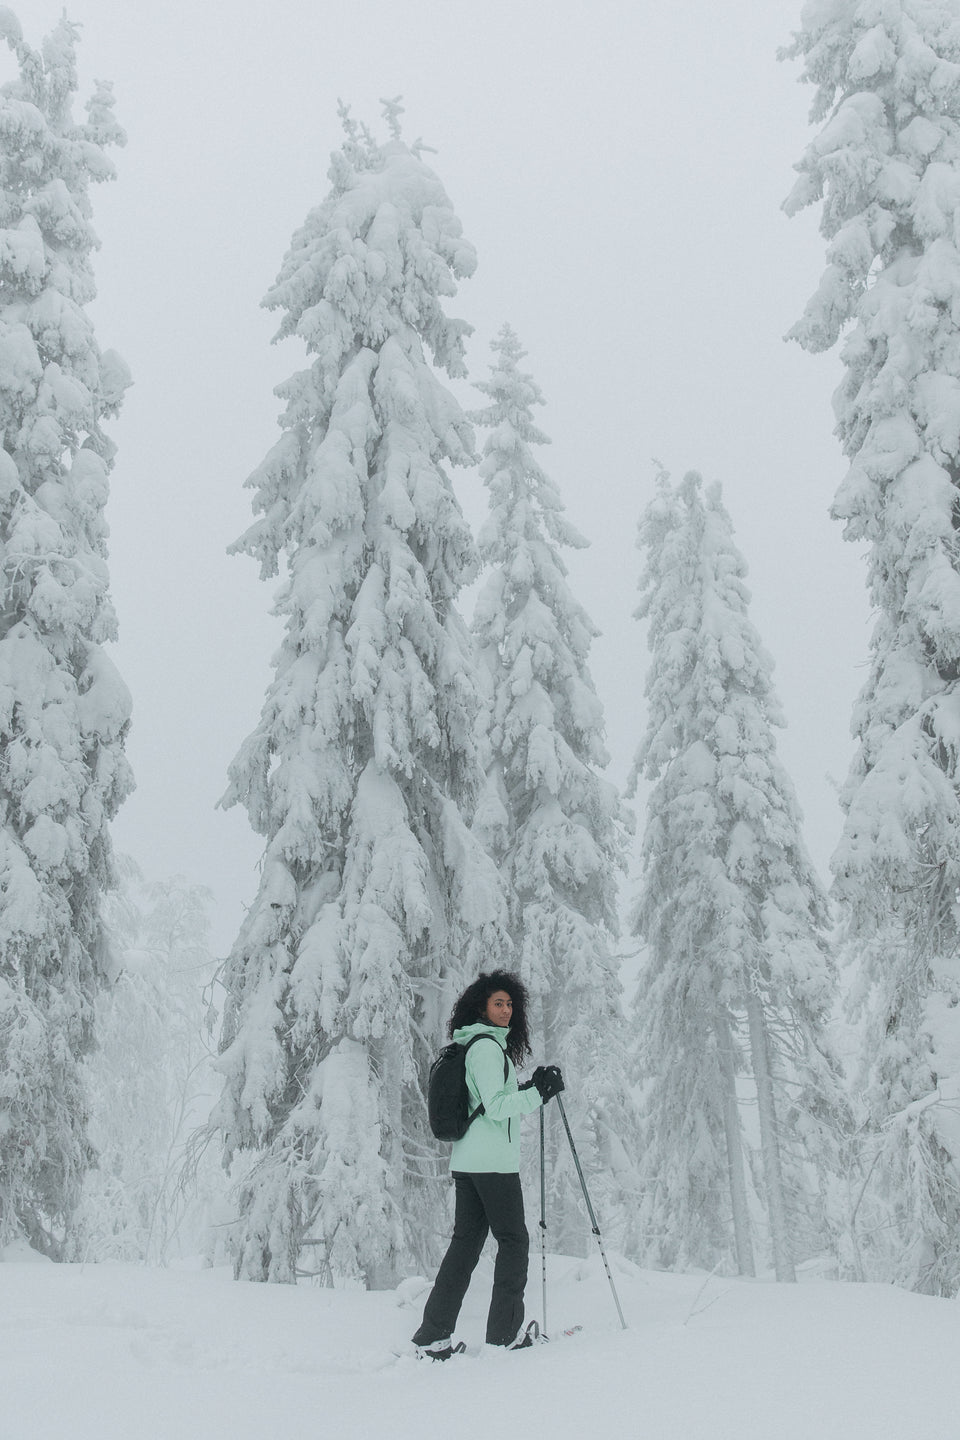 A woman standing in a snow covered forest wearing skis and a black rucksack